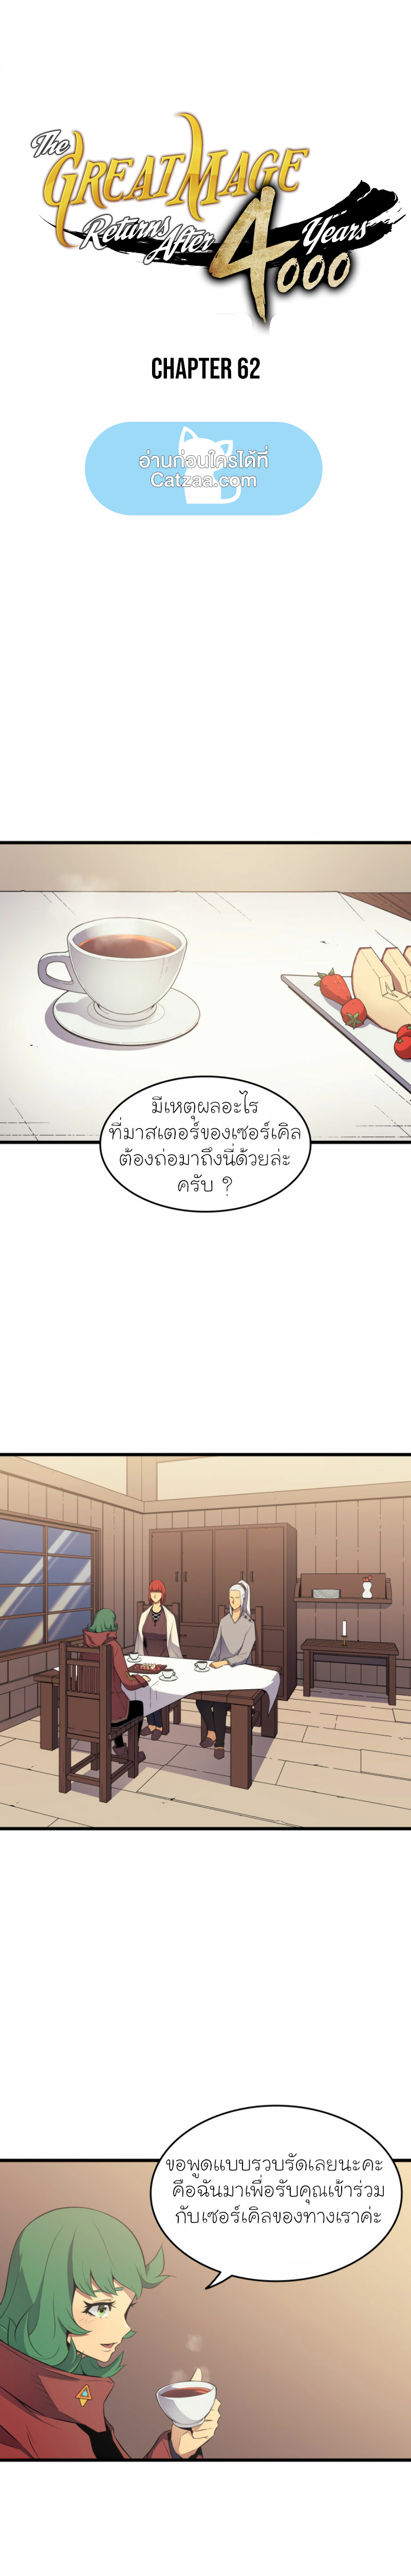 The Great Mage Returns After 4000 Years ตอนที่62 (1)